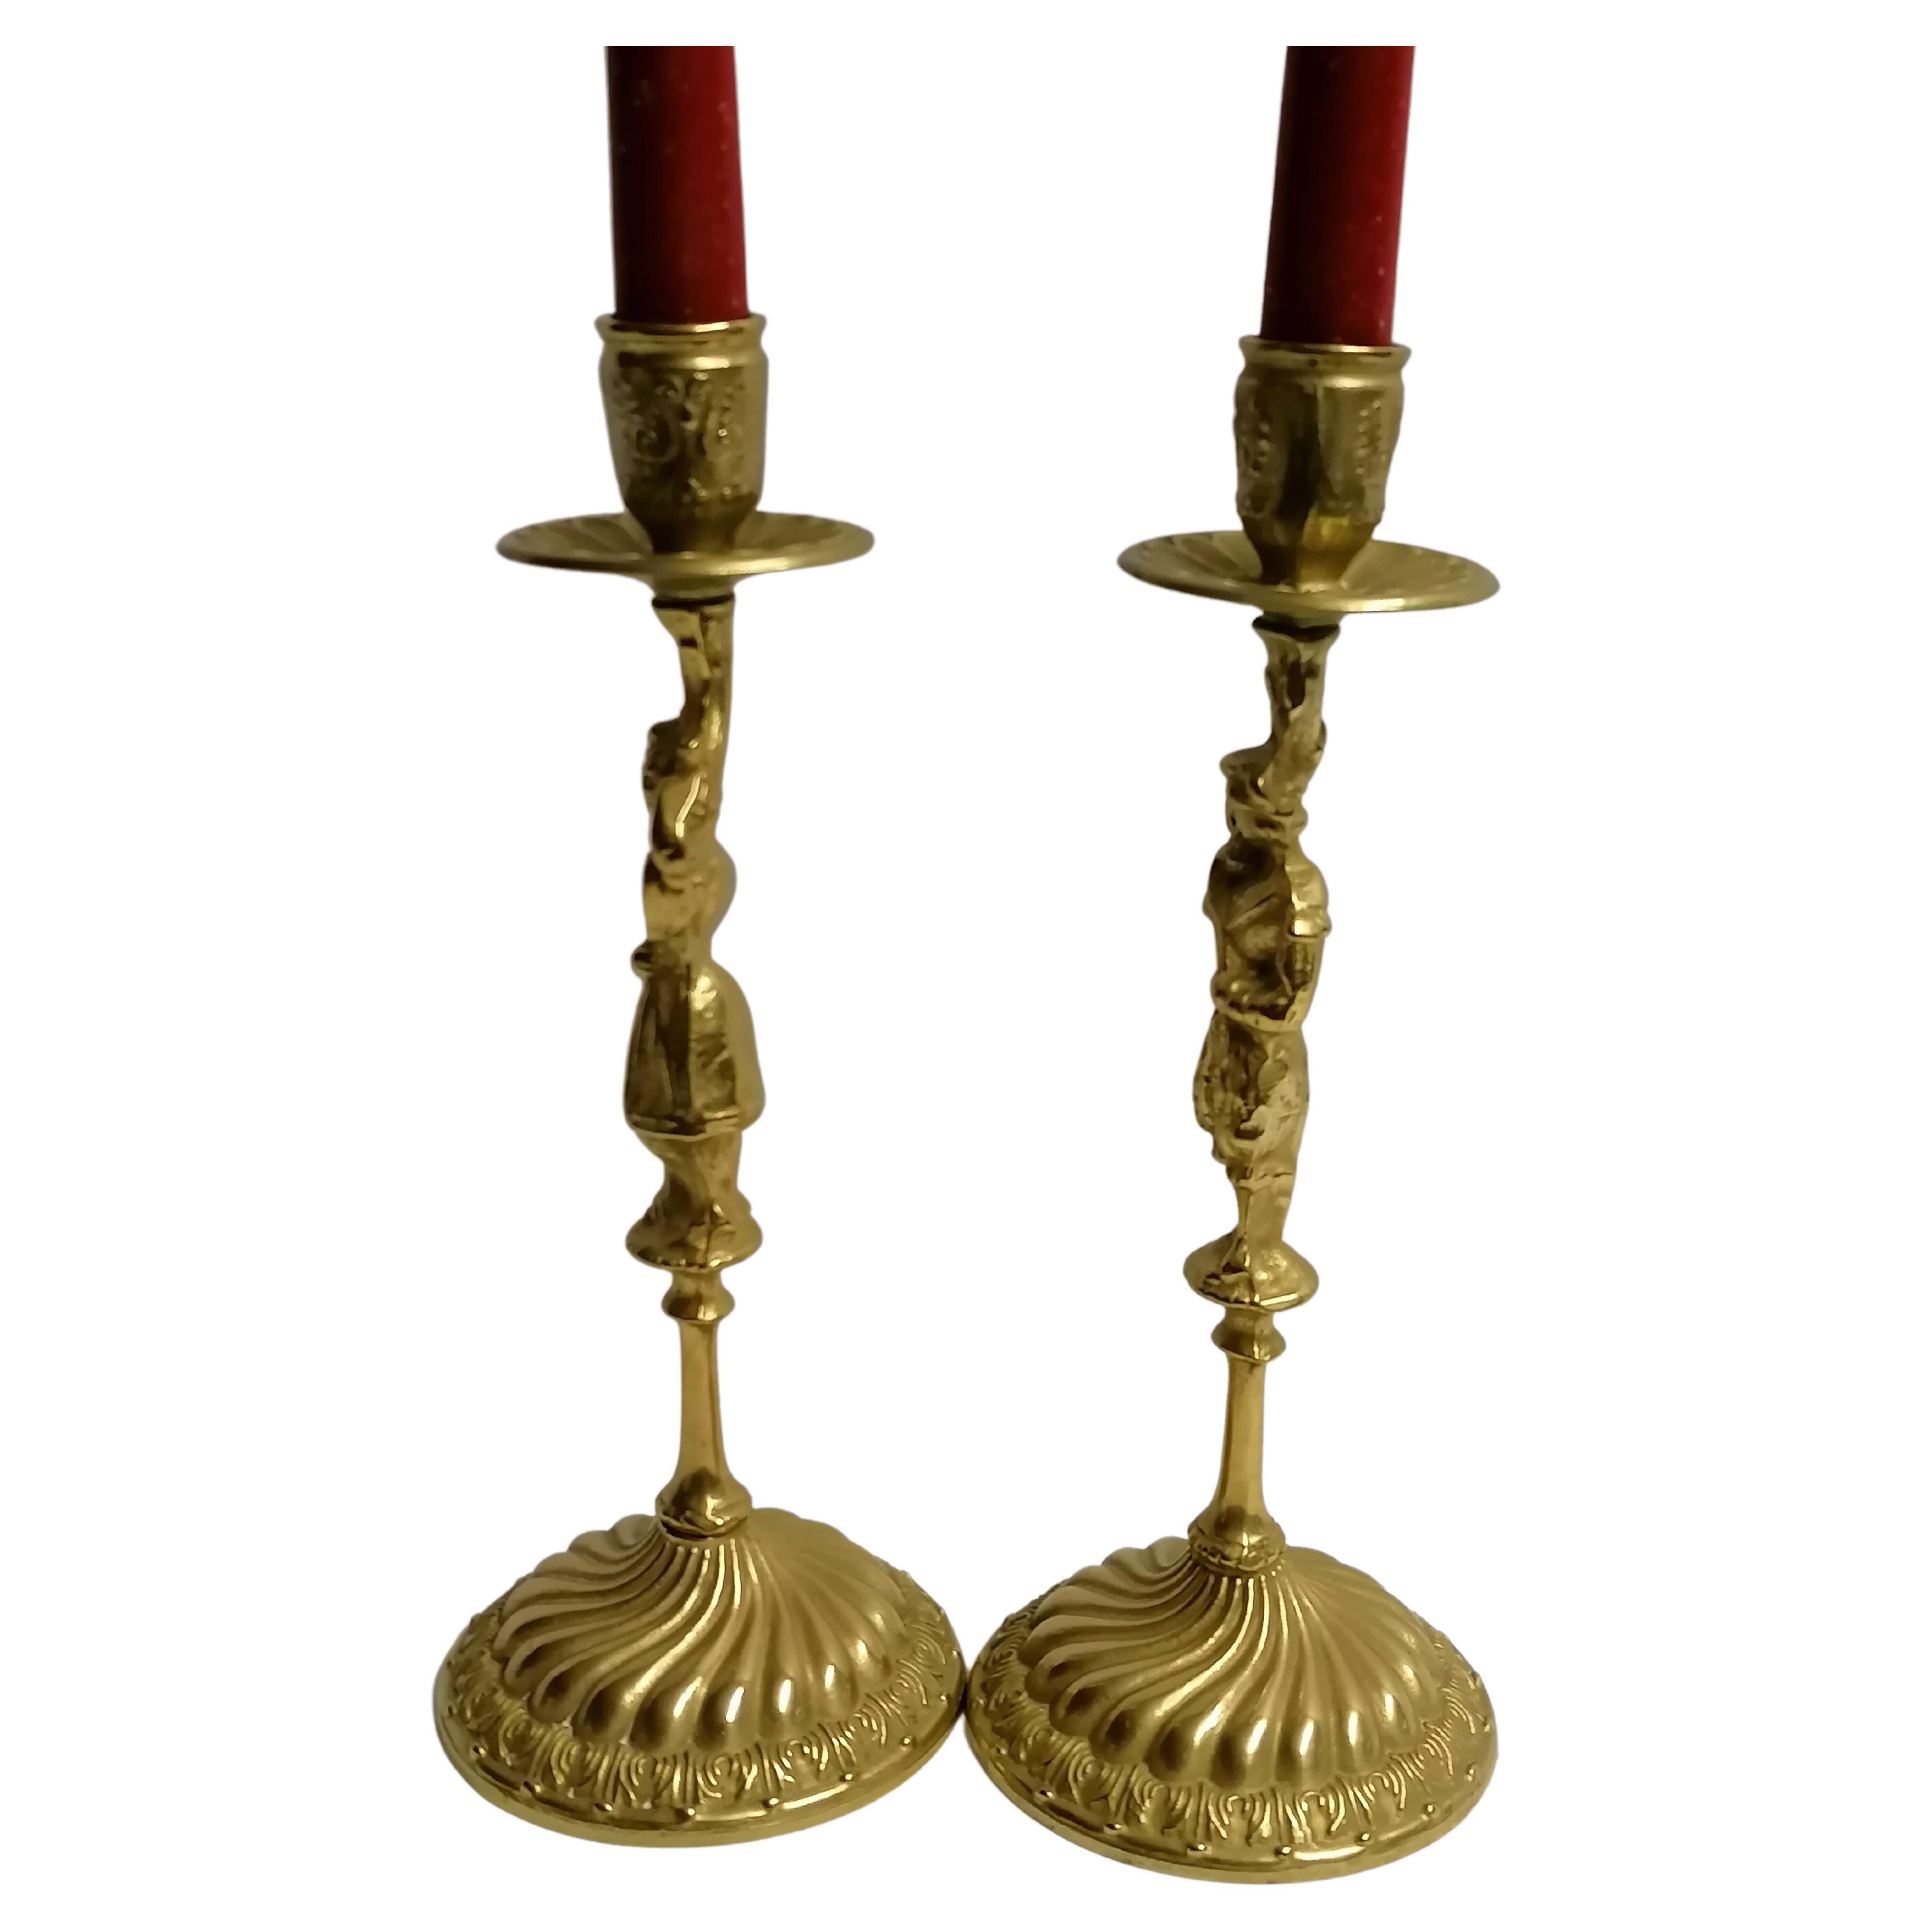 Italian decorative couple of candle holder figurine a man and a woman in solid brass candlestick, in good condition 
The item have been polished, they are ready to be used, would look great in any room 
Dimensions: 25 cm H x 10 cm x 10 cm 
Weight: